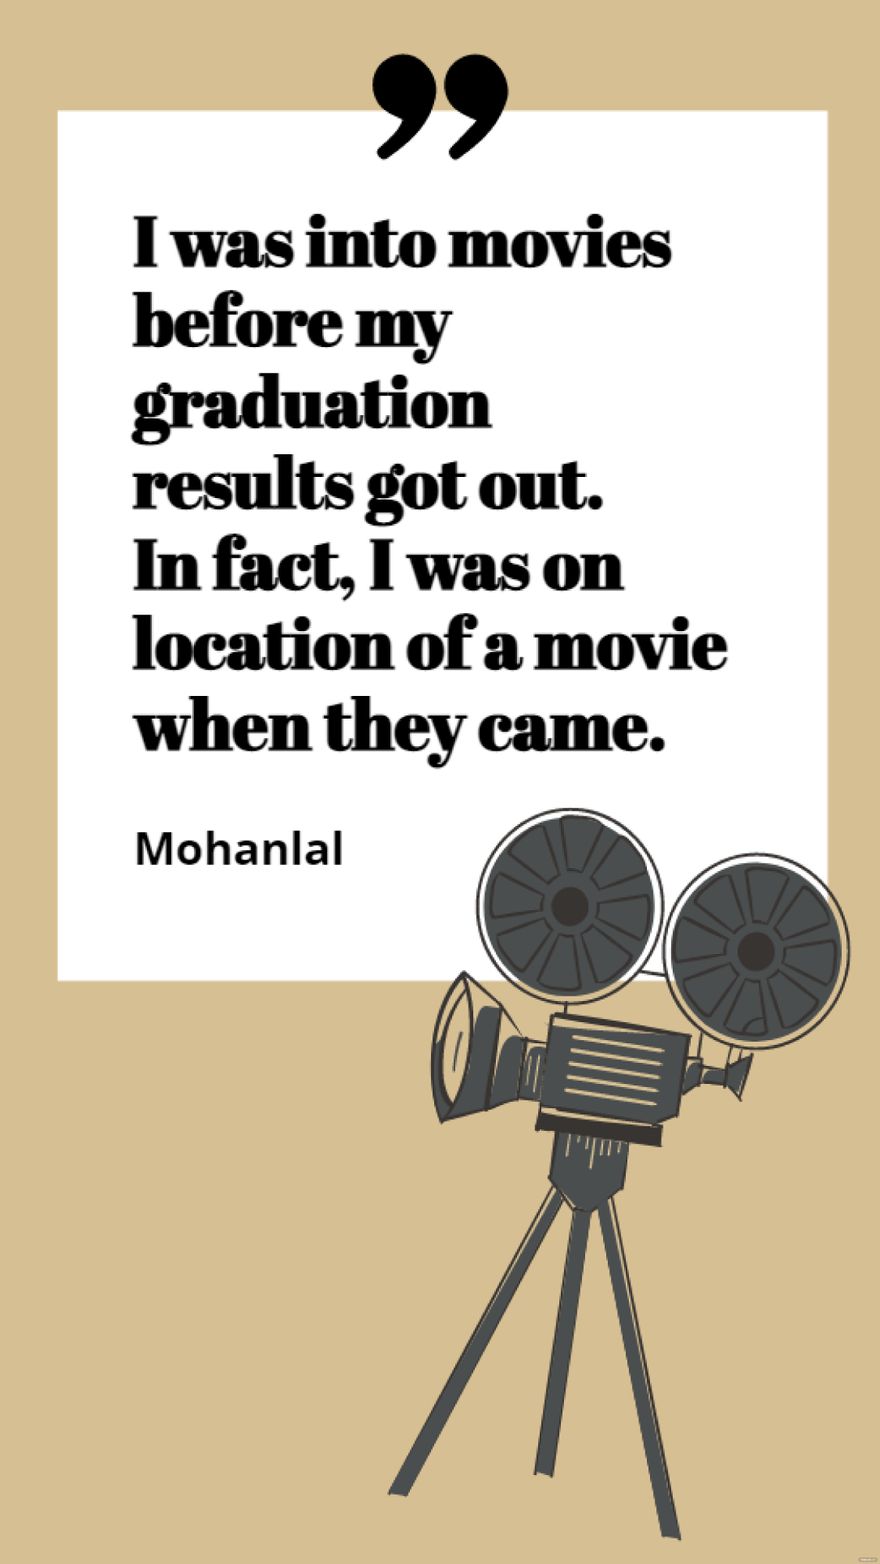 Mohanlal - I was into movies before my graduation results got out. In fact, I was on location of a movie when they came.